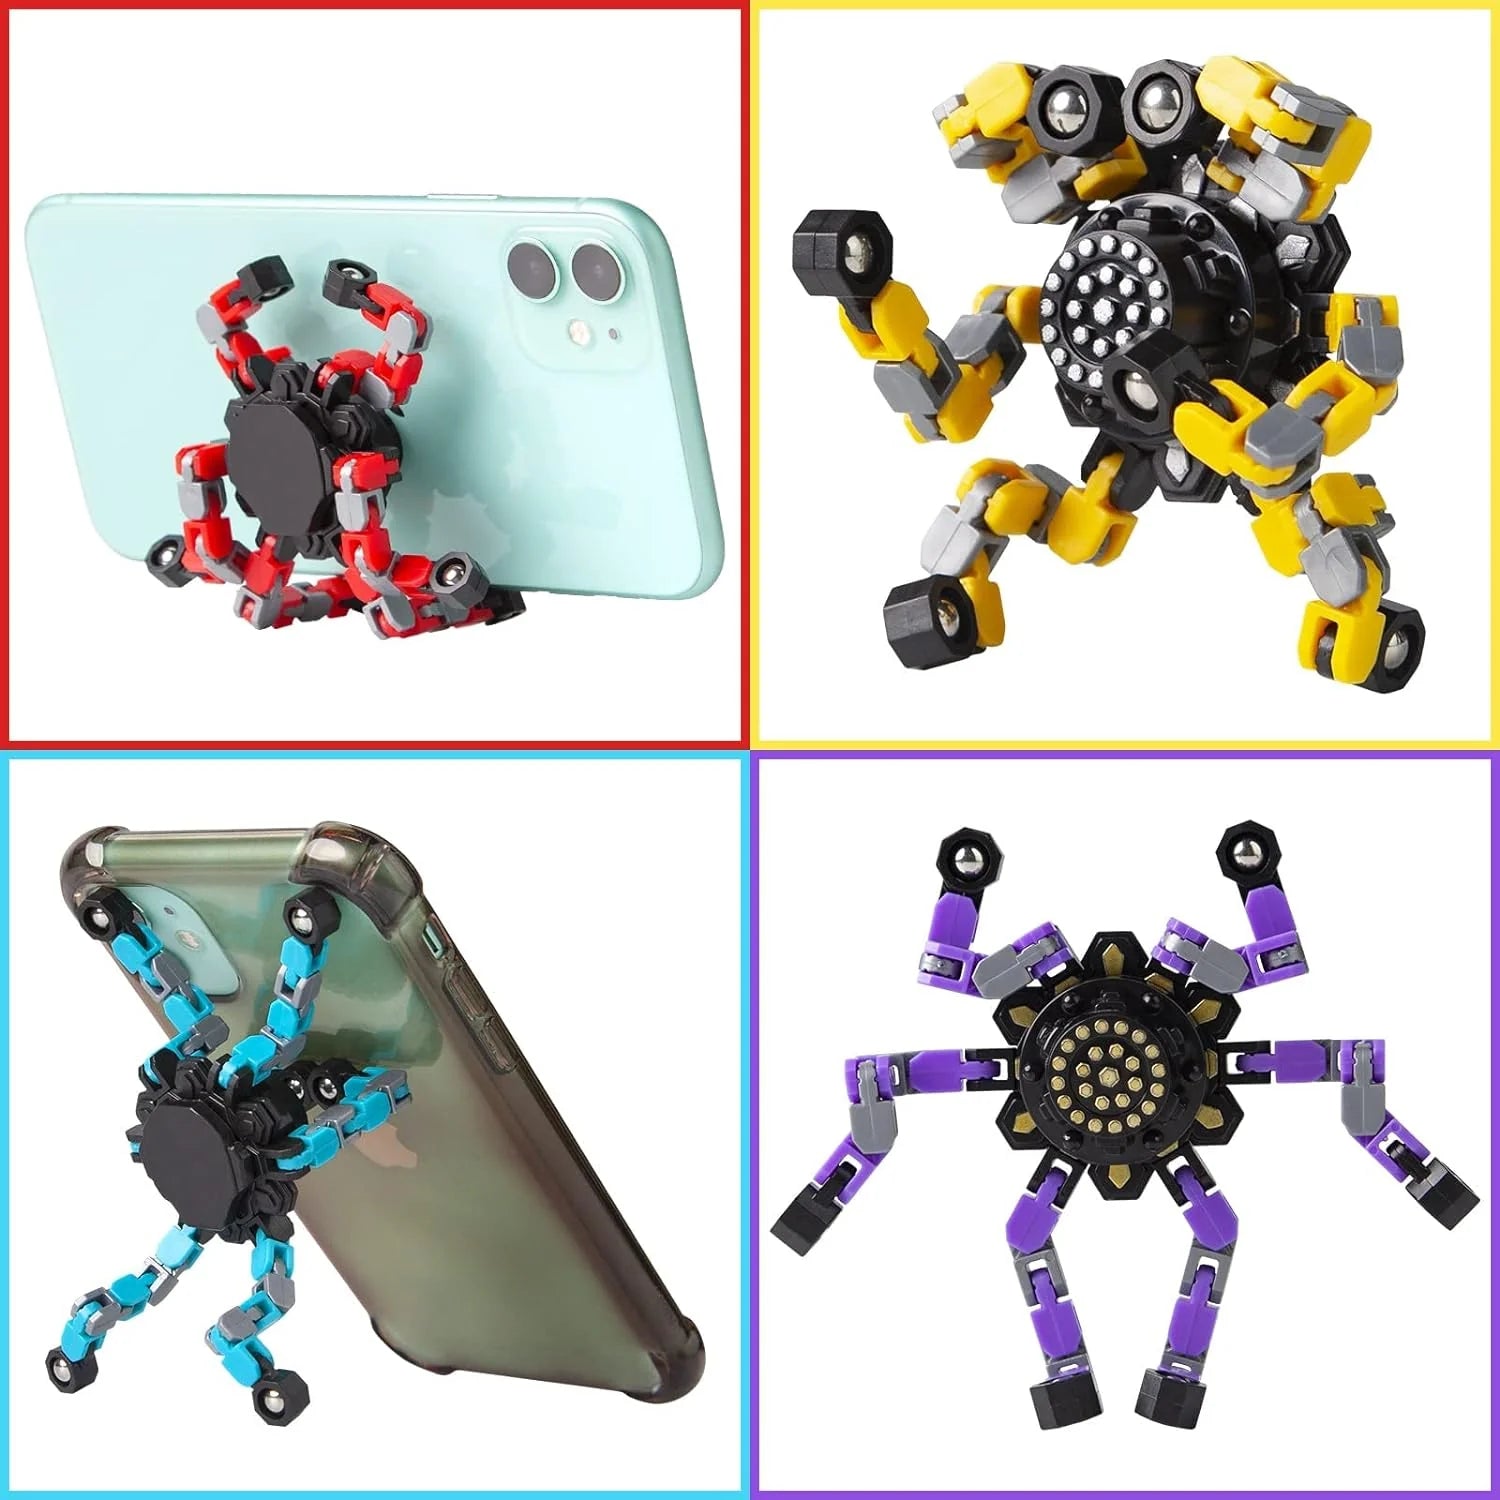 Transformable Fidget Spinners 4 Pcs for Kids and Adults Stress Relief Sensory Toys for Boys and Girls Fingertip Gyros for ADHD Autism for Kids Gifts Easter Basket Stuffers (Fidget Toy 4pc)